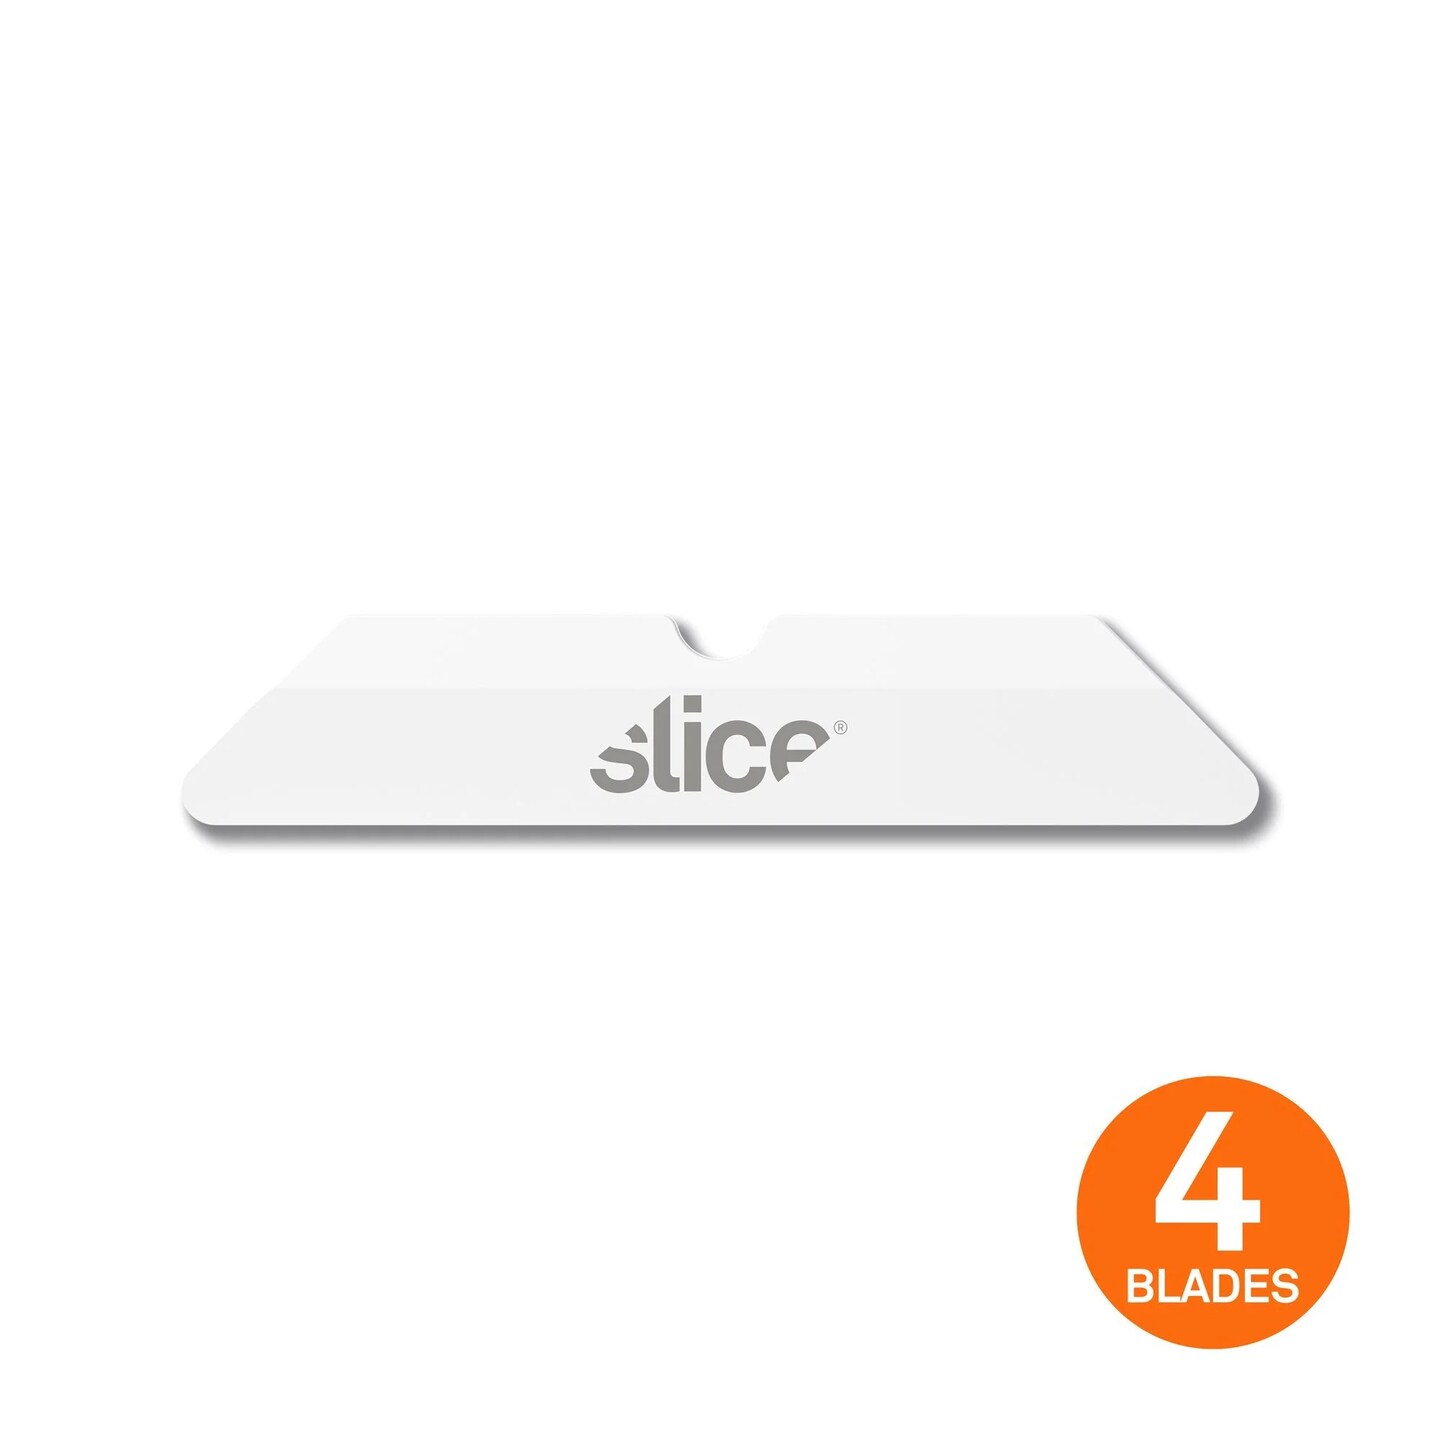 Slice Box Cutter Blades (Rounded Tip) - Pack of 4